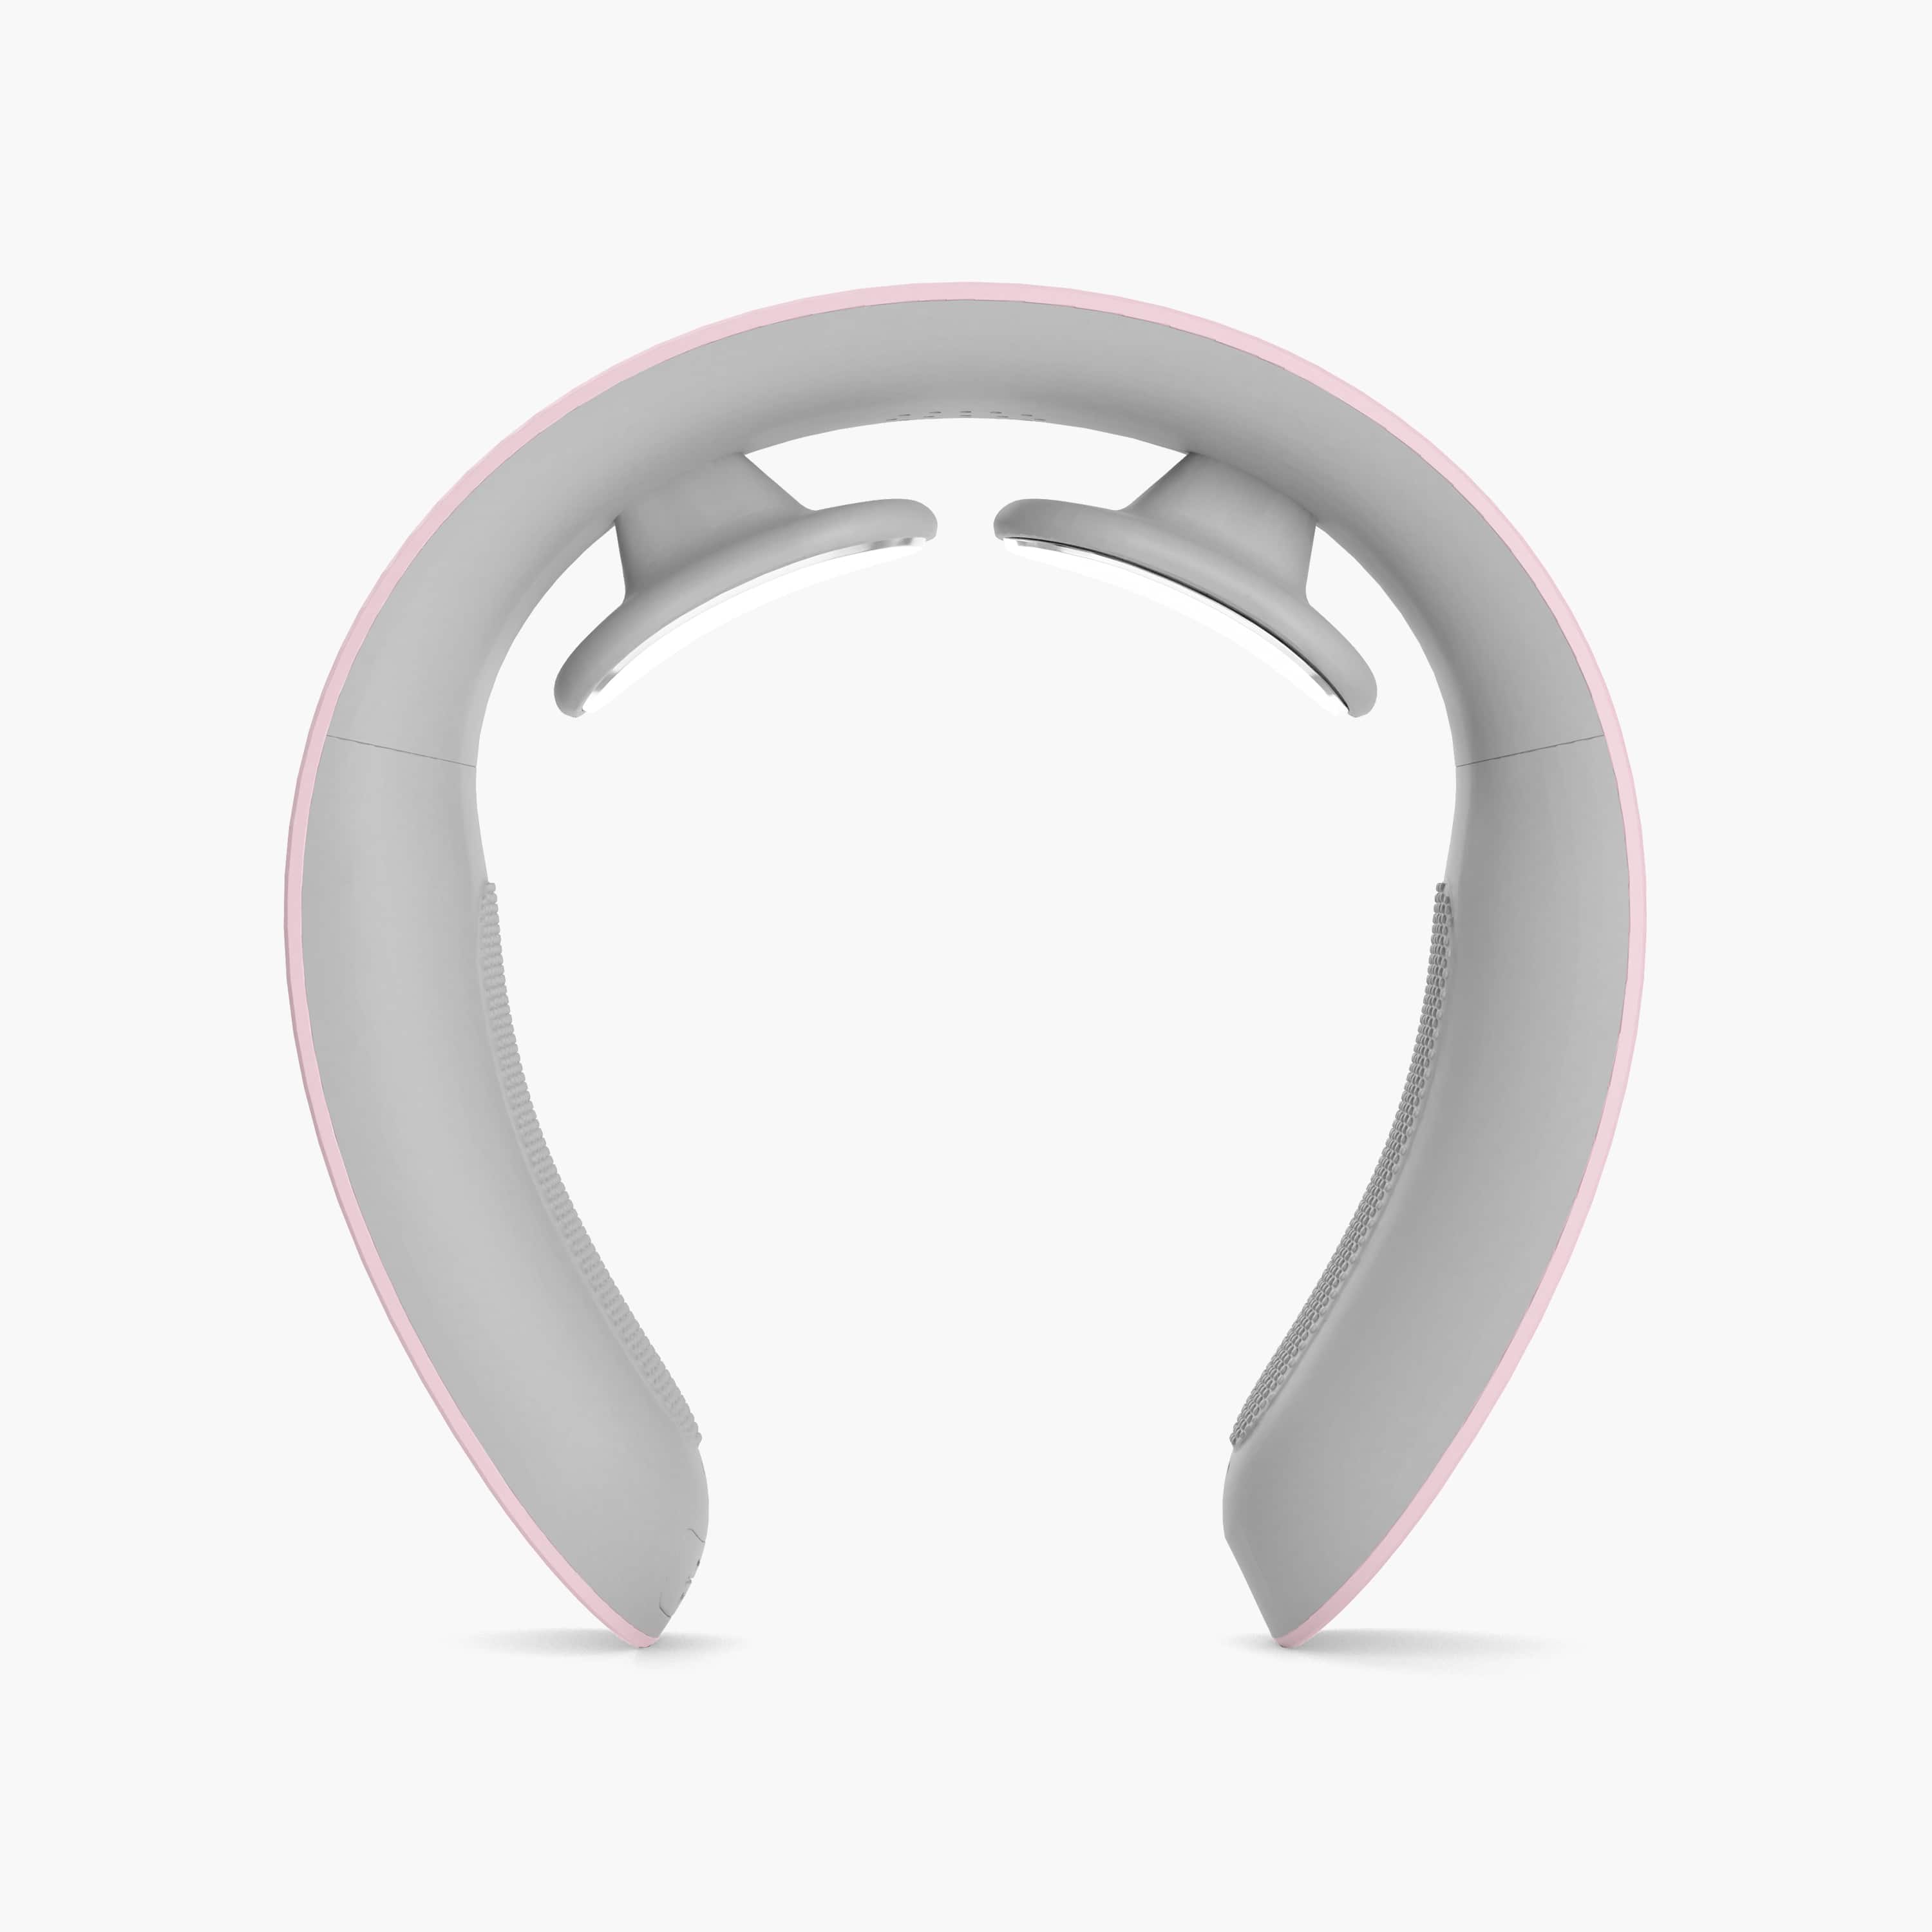 Luna by Nomisk. A pink neck massager that combines heat and pulse therapy to instantly relieve neck pain. Use her to relieve migraines, muscle tension and pain instantly. Shown from a bird's eye view.